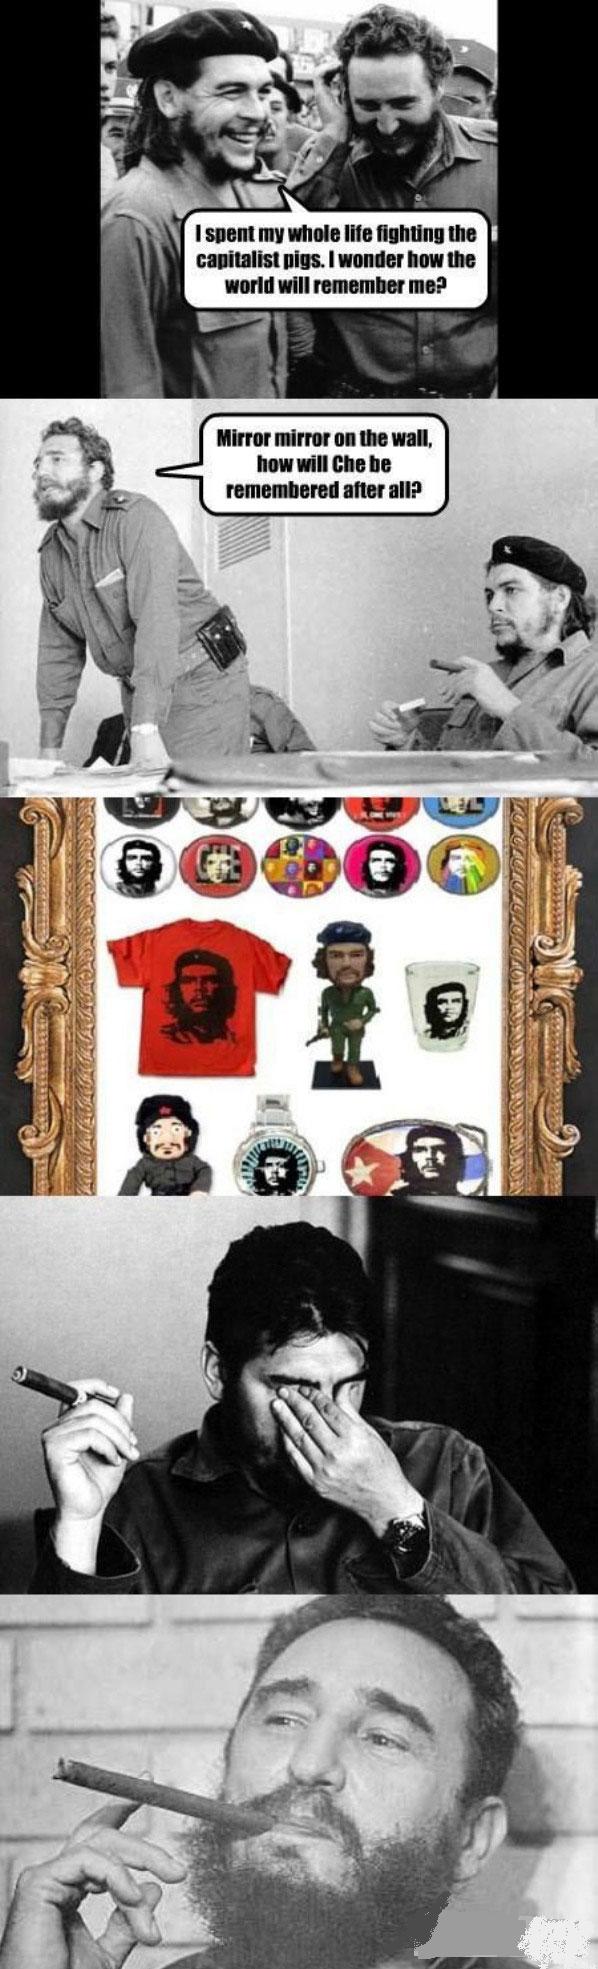 Unfortunatly for Che, the world made him an accessory 
